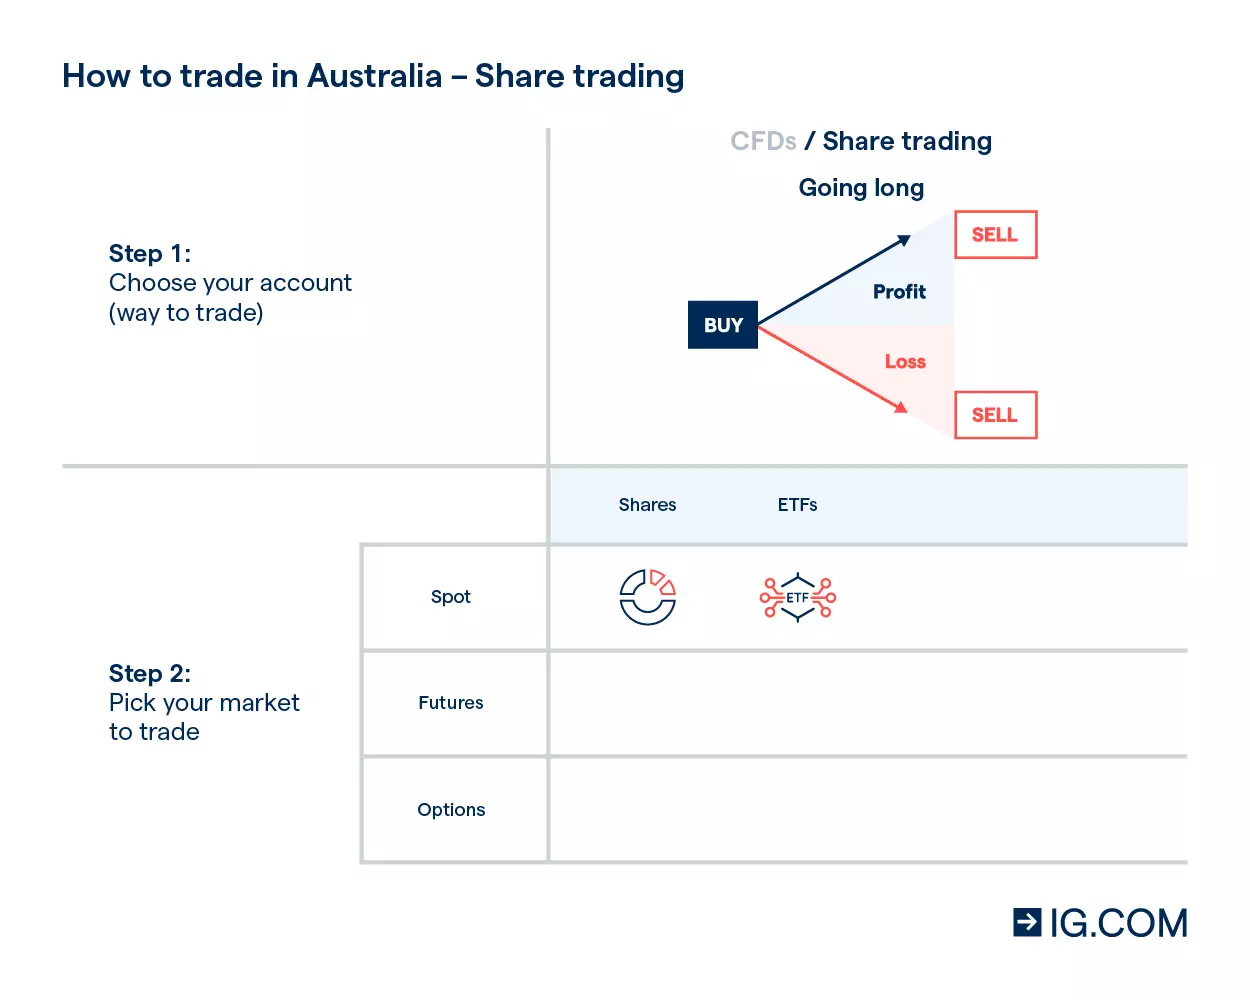 How to trade in Australia - share trading